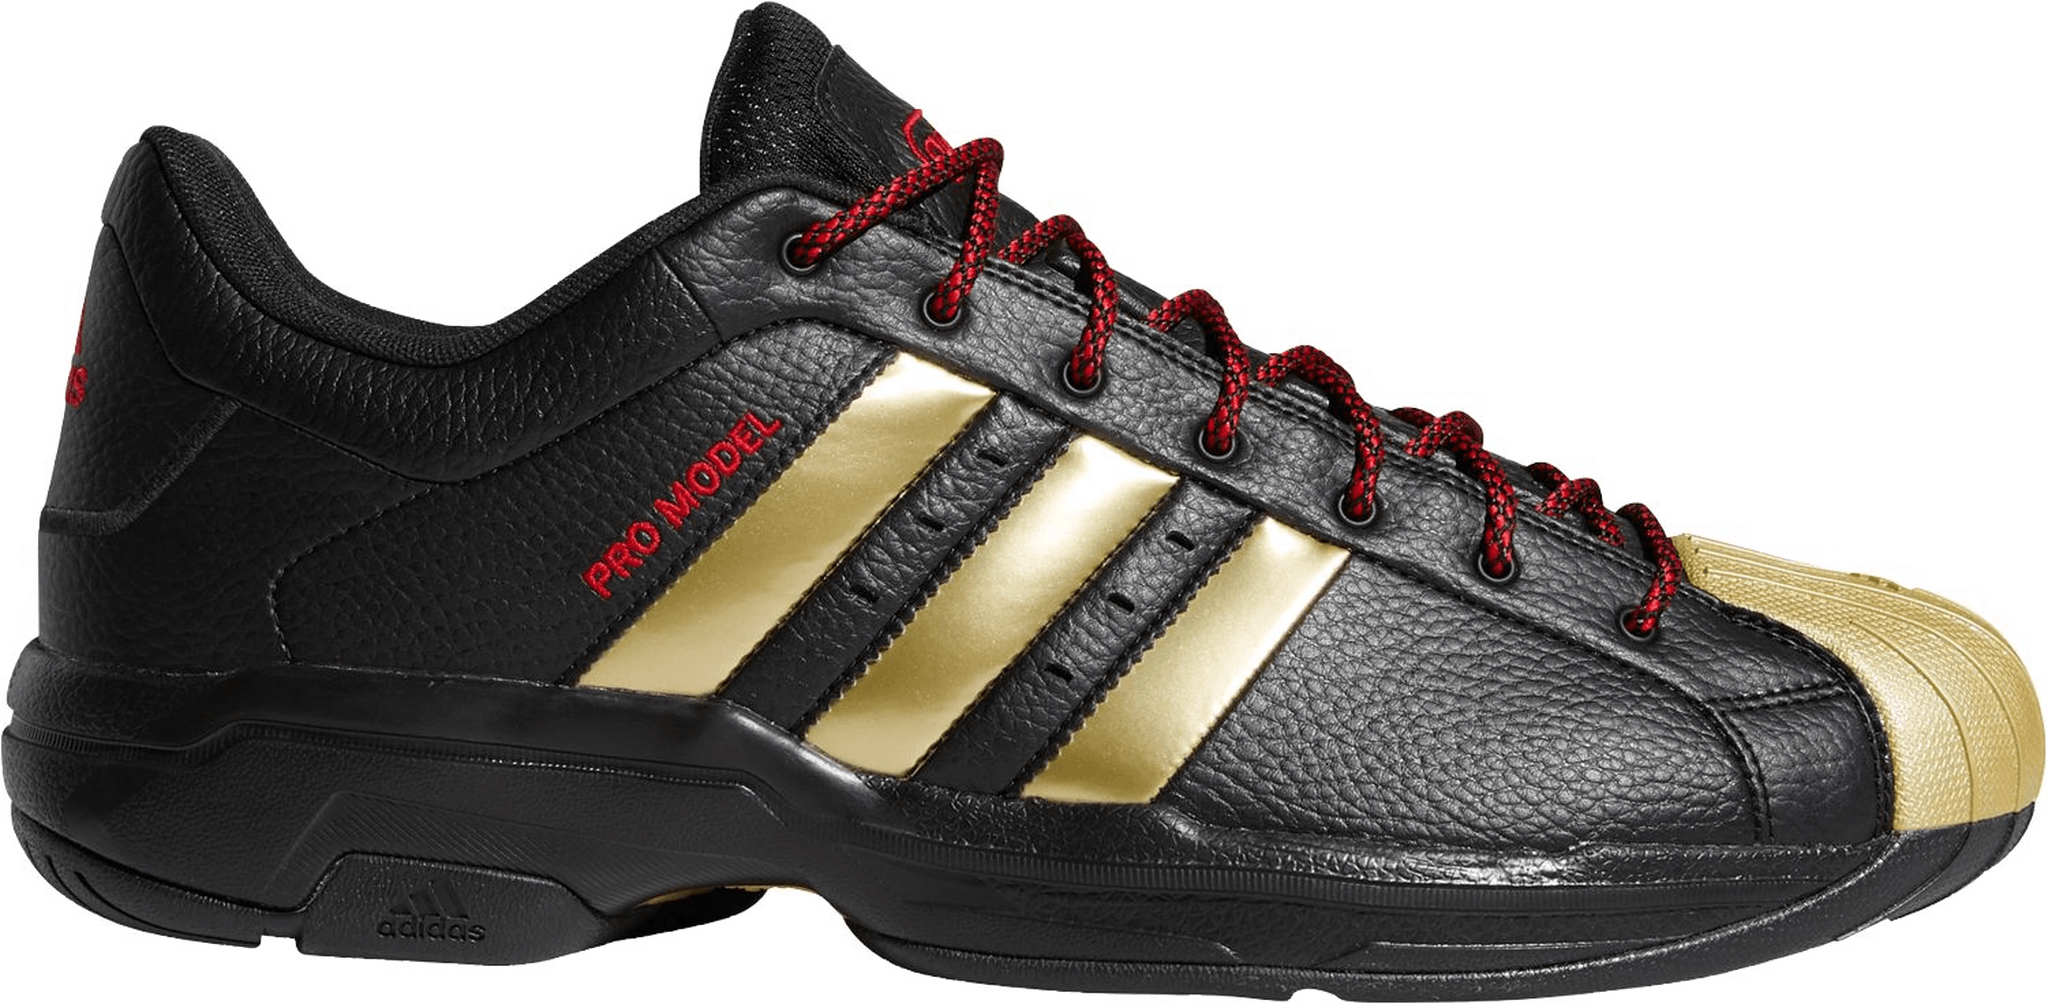 Adidas Pro Model 2G Performance Review | 2 Sneaker Expert Opinions